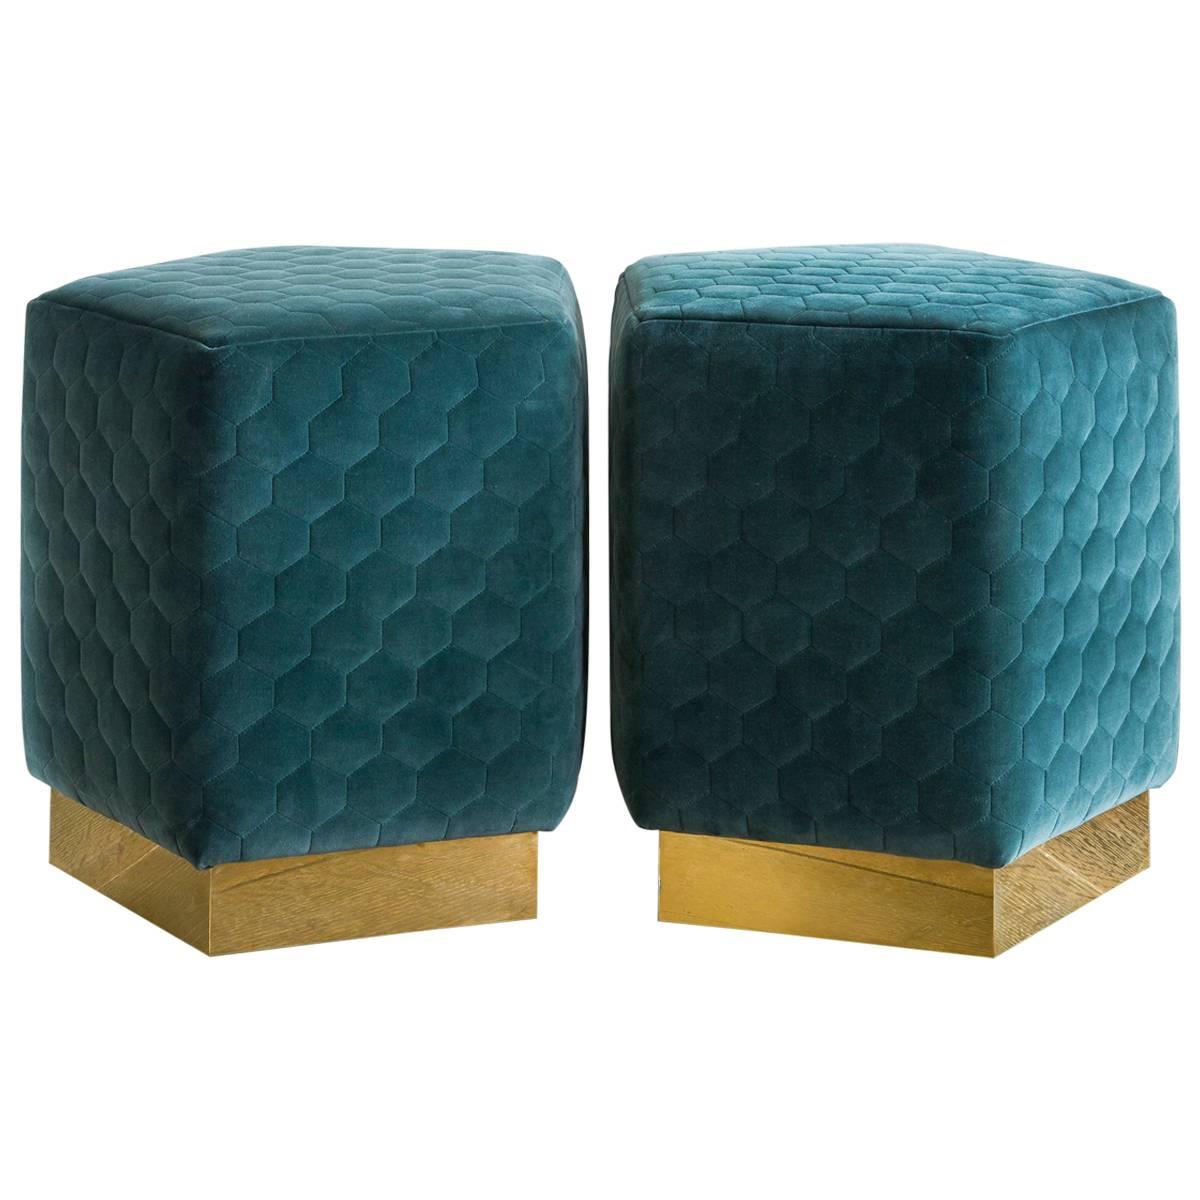 Ermes Pentagon Pouf in Quilted Velvets and Brass or Steel Powder-Coated Plinth